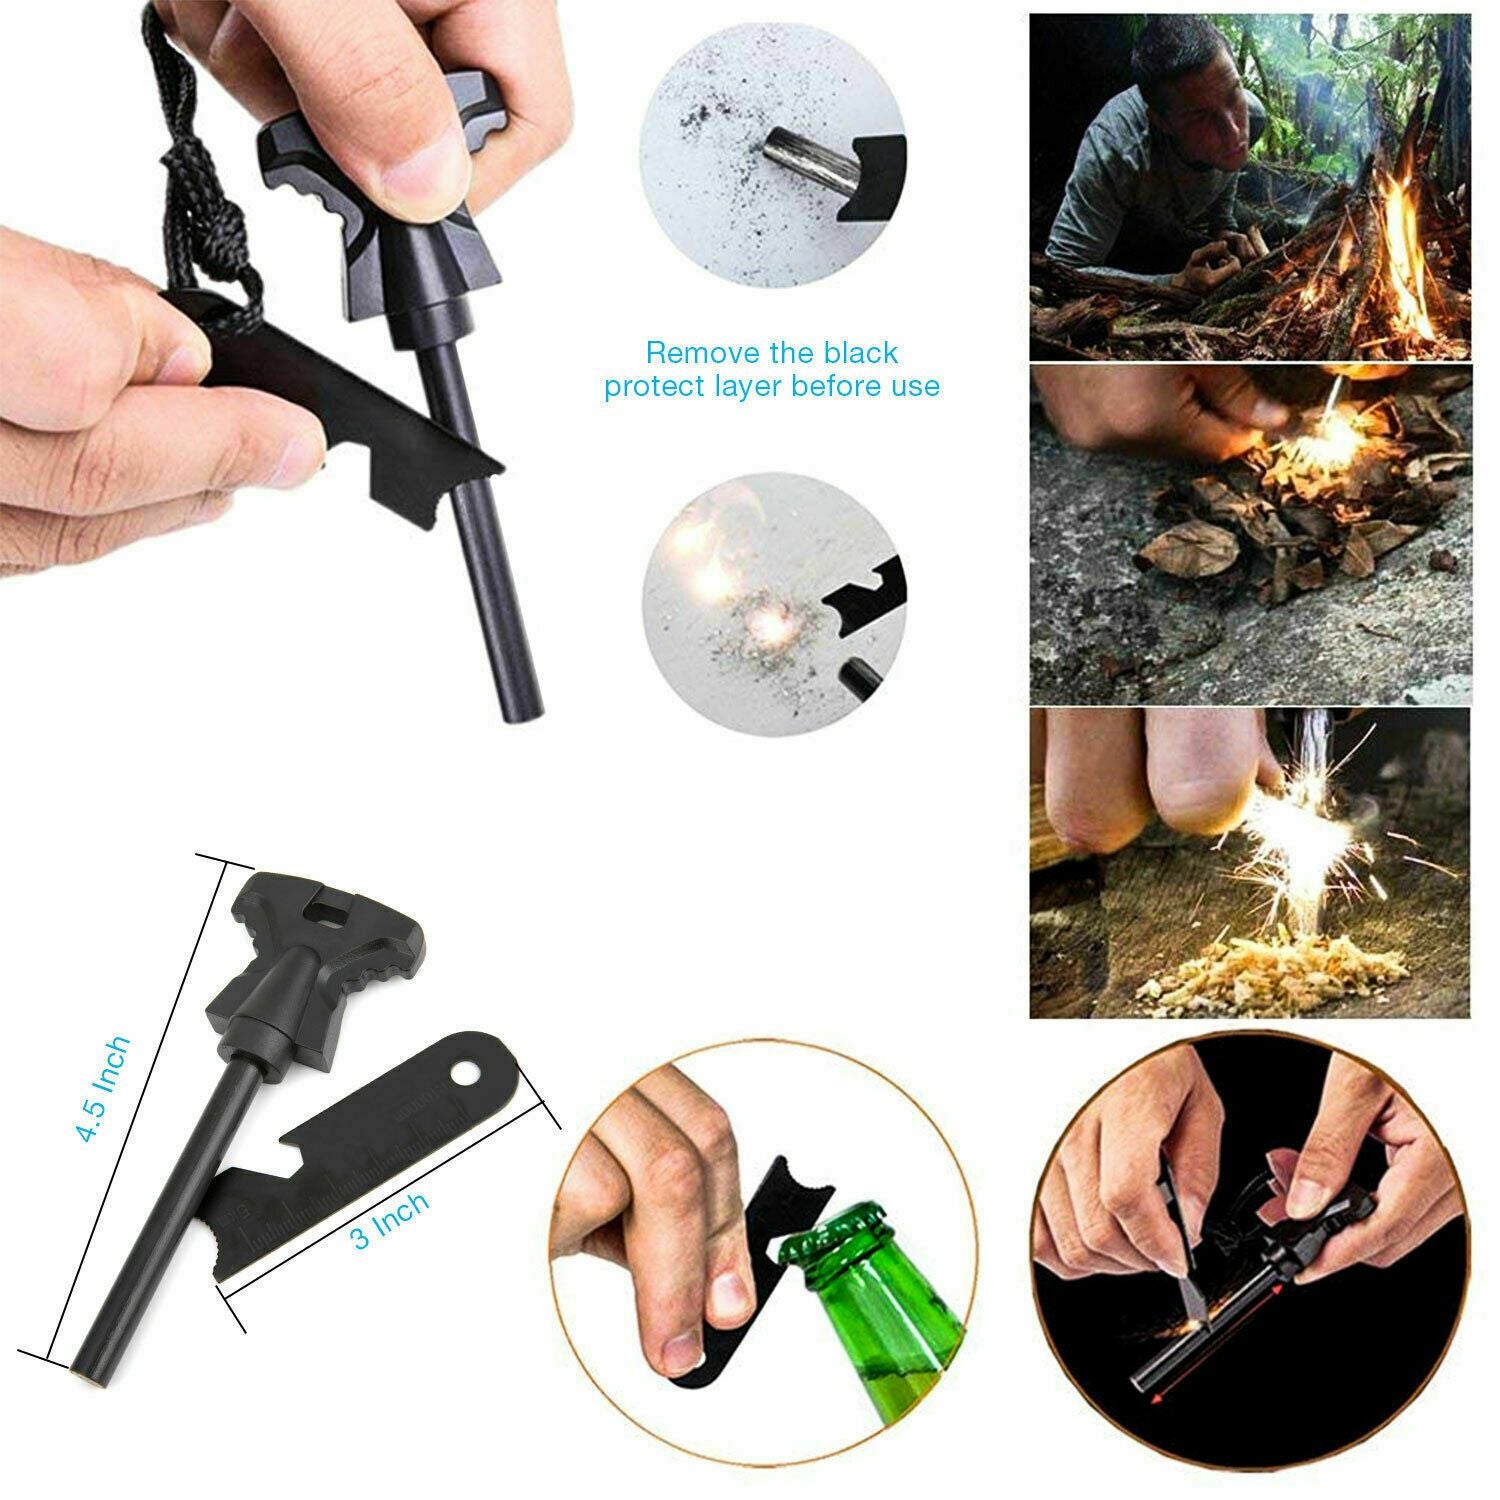 [Limited Time Offer !!!] 14 in 1 Outdoor Emergency Survival And Safety Gear Kit Camping